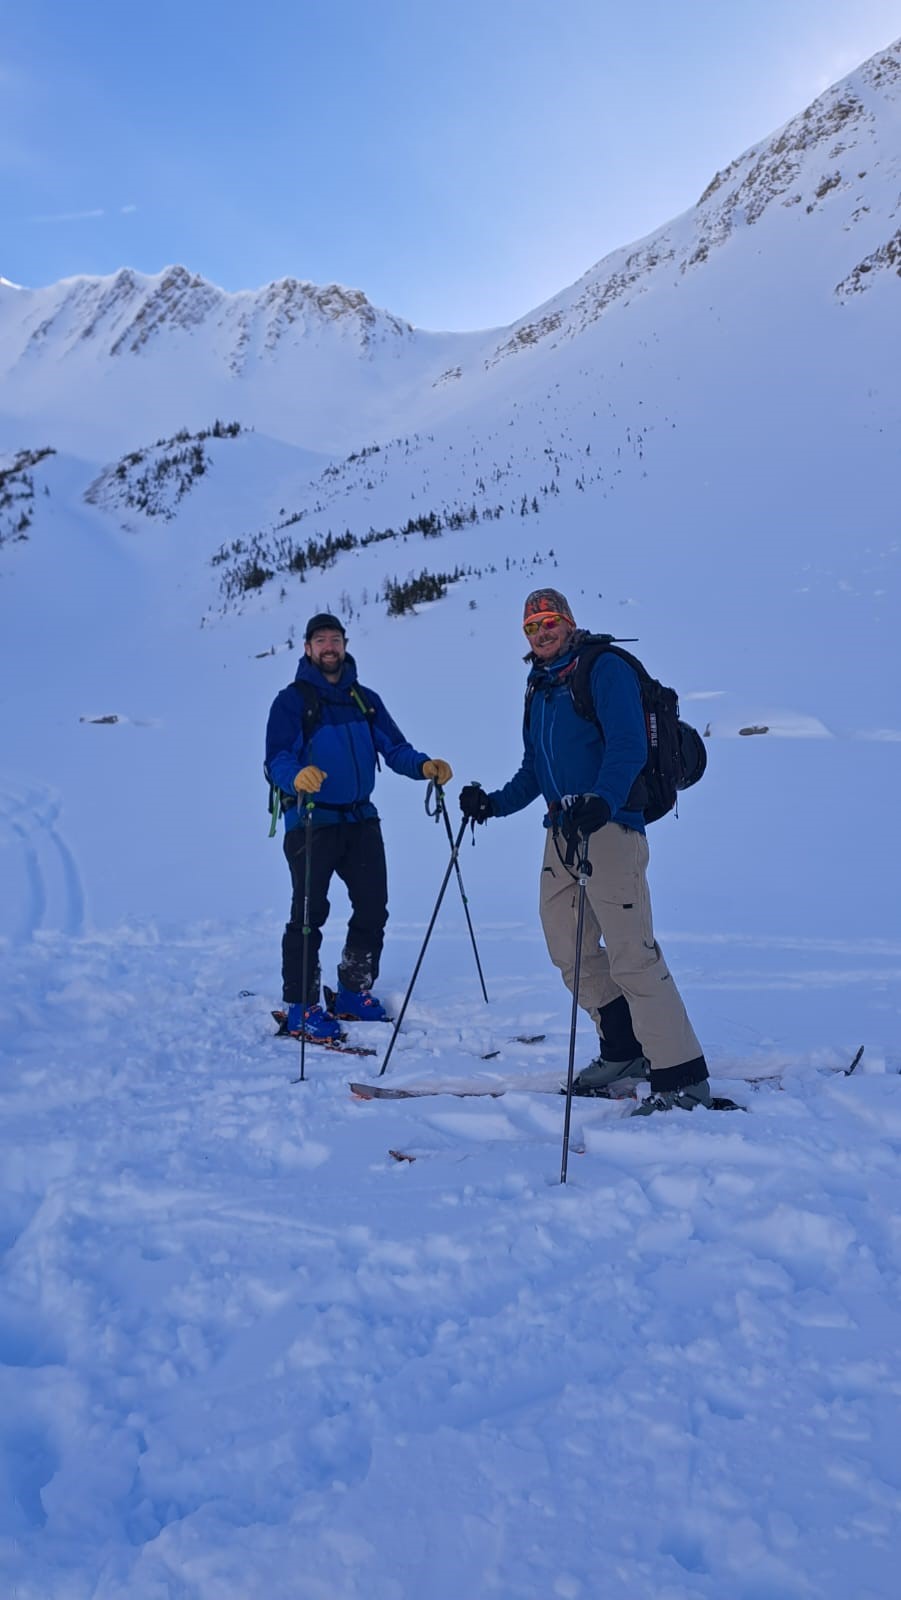 Two men on skis in snow with mountain behind them